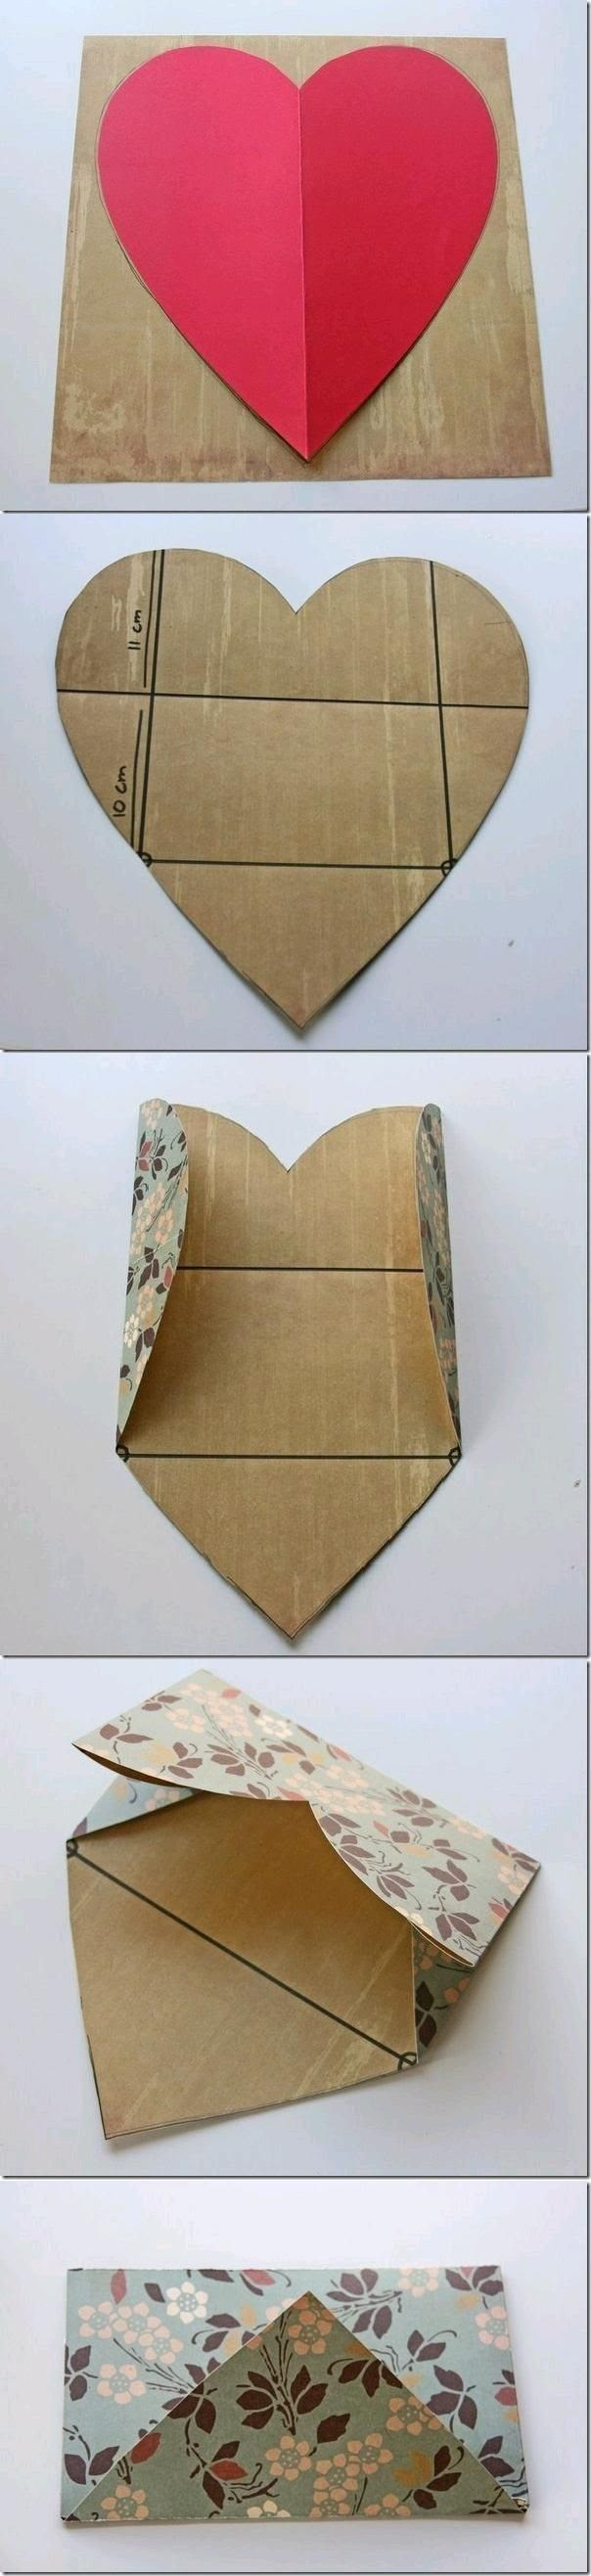 DIY Envelope from a Heart